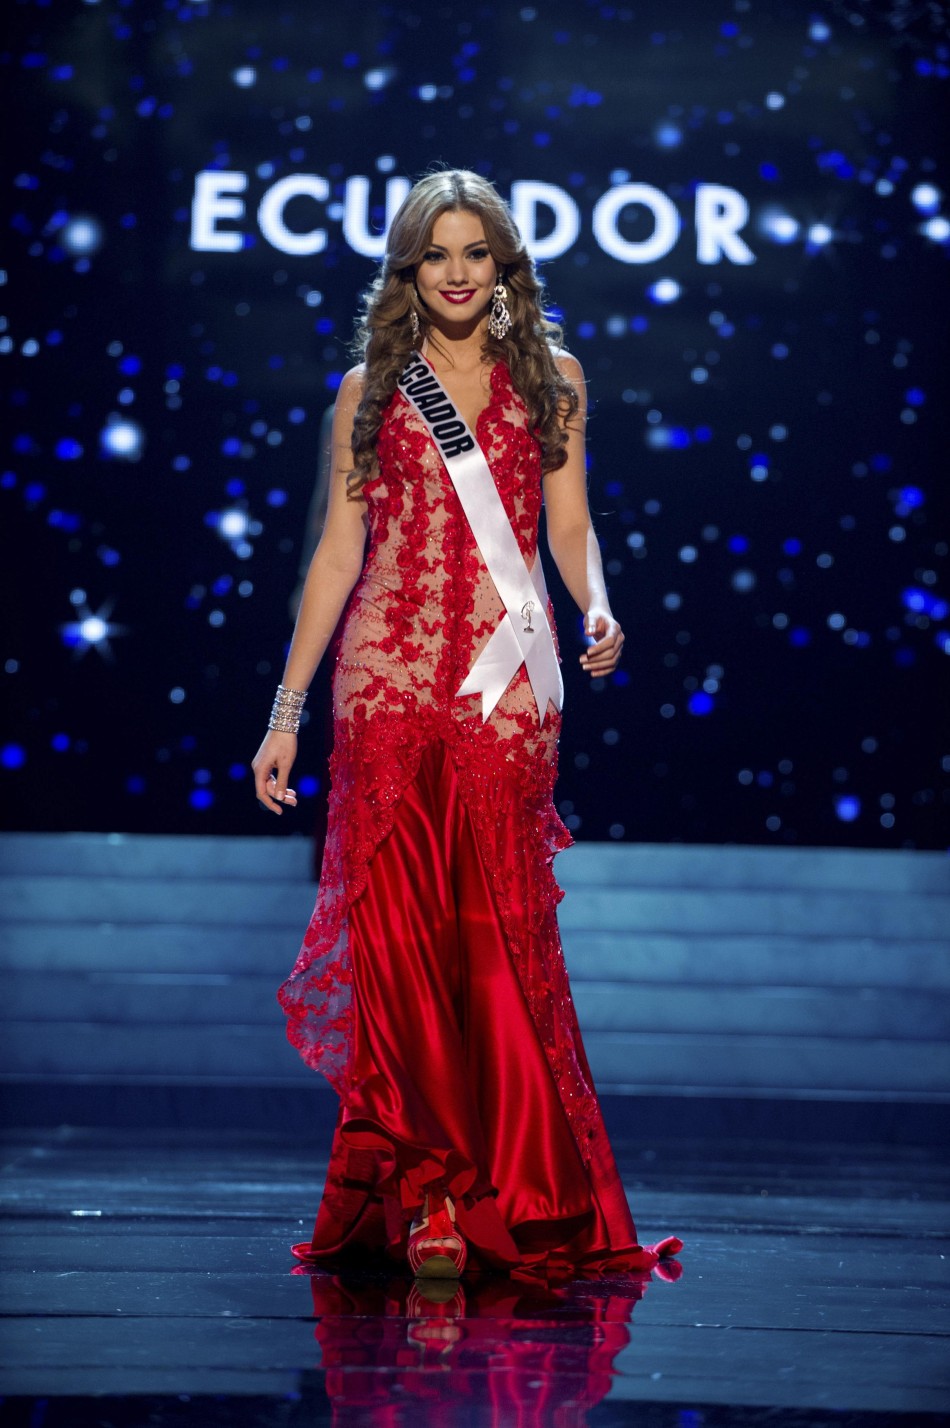 Miss Ecuador 2012 Perez competes in an evening gown of her choice during the Evening Gown Competition of the 2012 Miss Universe Presentation Show in Las Vegas